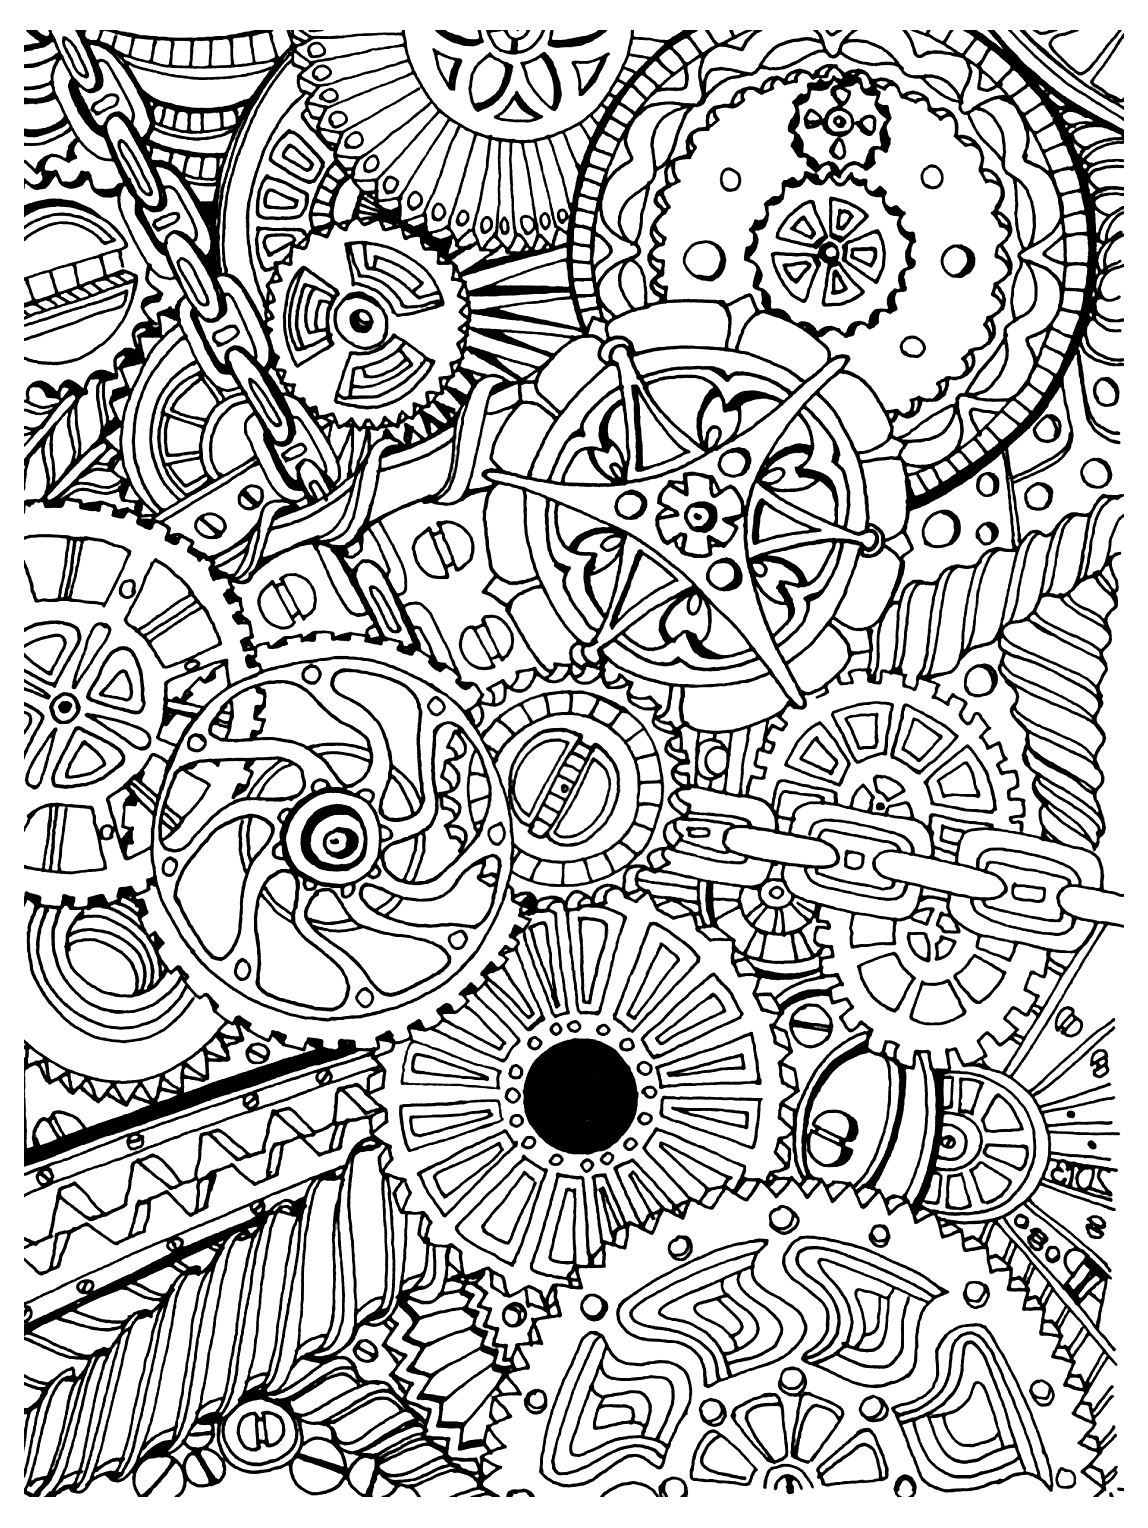 adult coloring pages for stress relief | stress relief coloring pages | stress relief coloring pages for adults